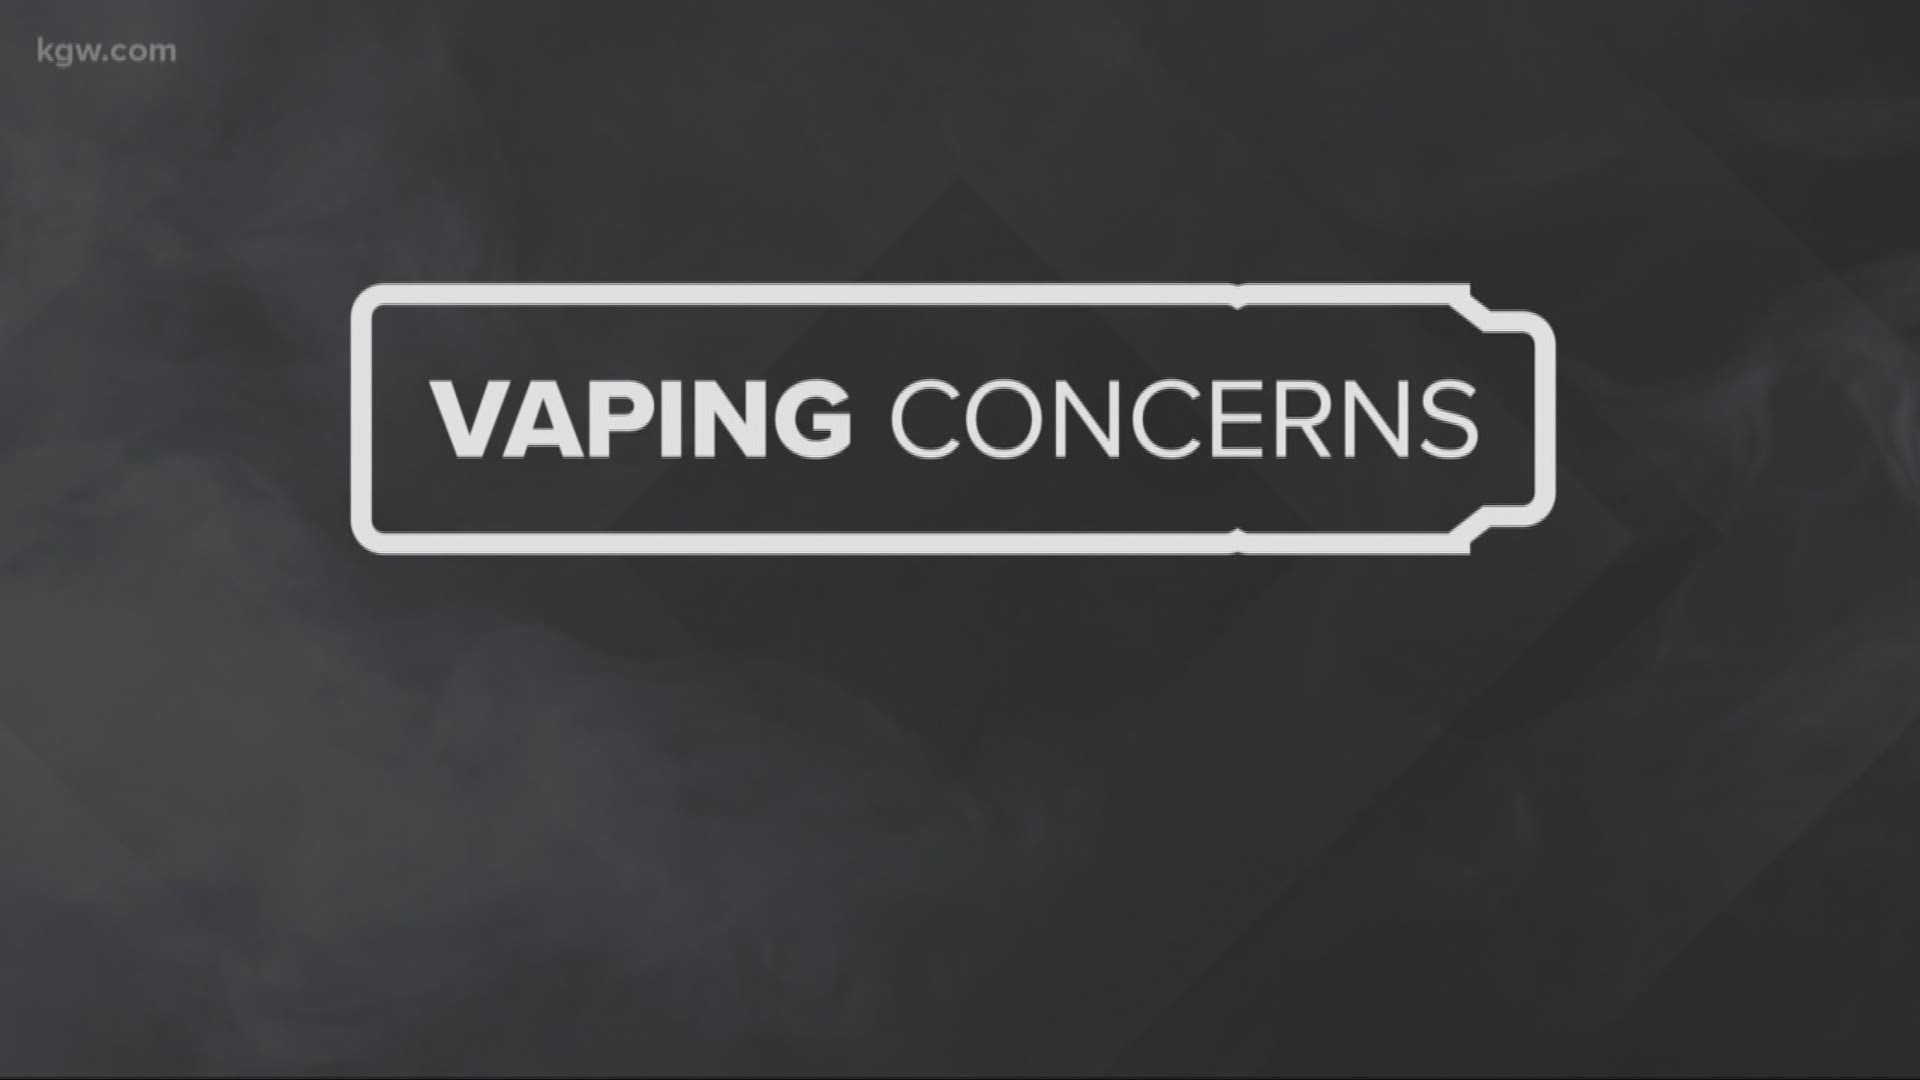 Verifying myths about vaping. Here’s what we know, and what we don’t know.